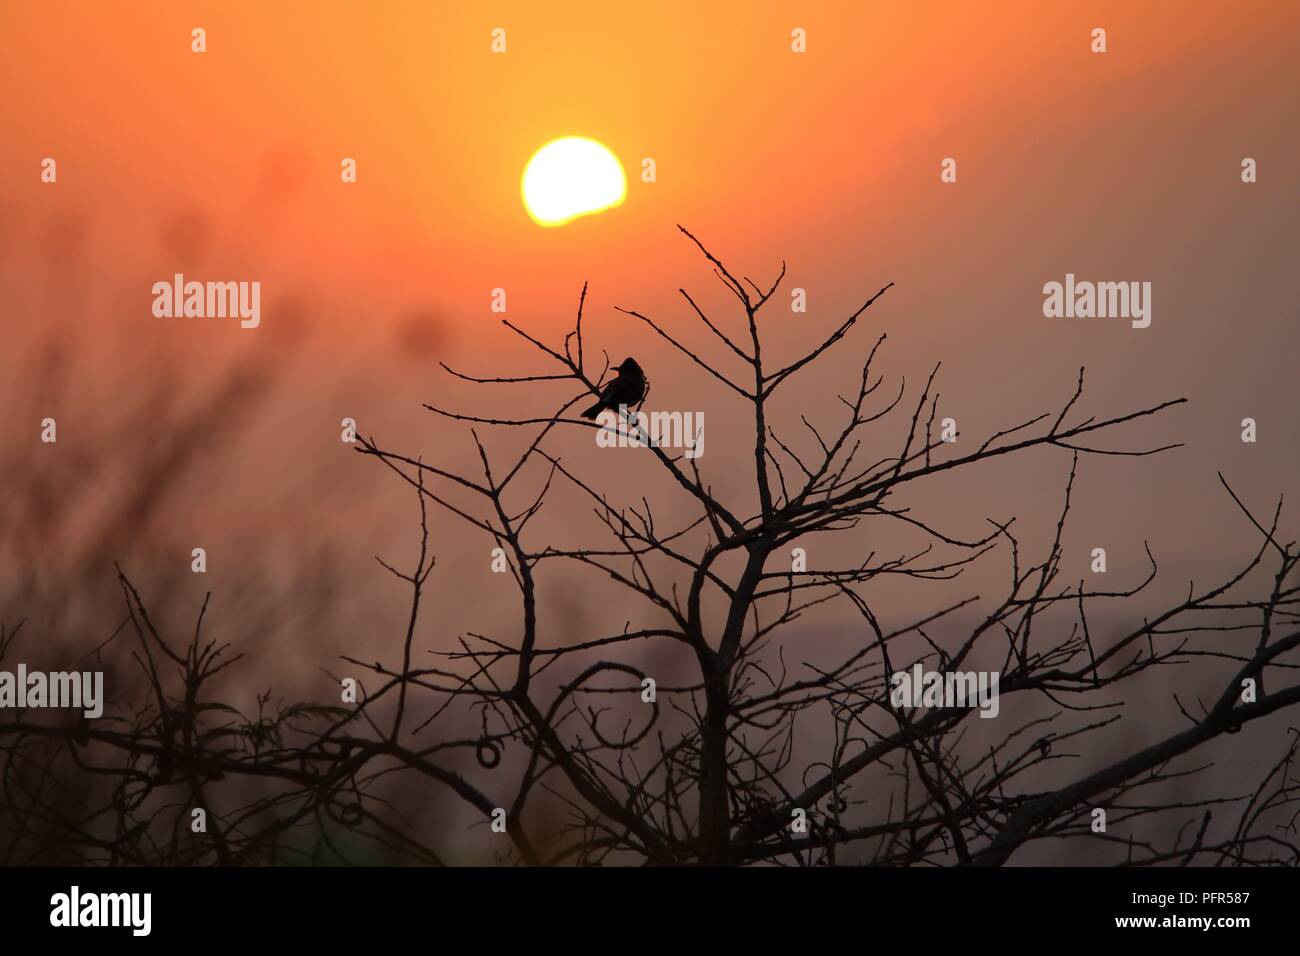 Bird photographed on early morning with background of rising son. Beautiful Orange colors making picture more attractive with Tree & Grass. Stock Photo